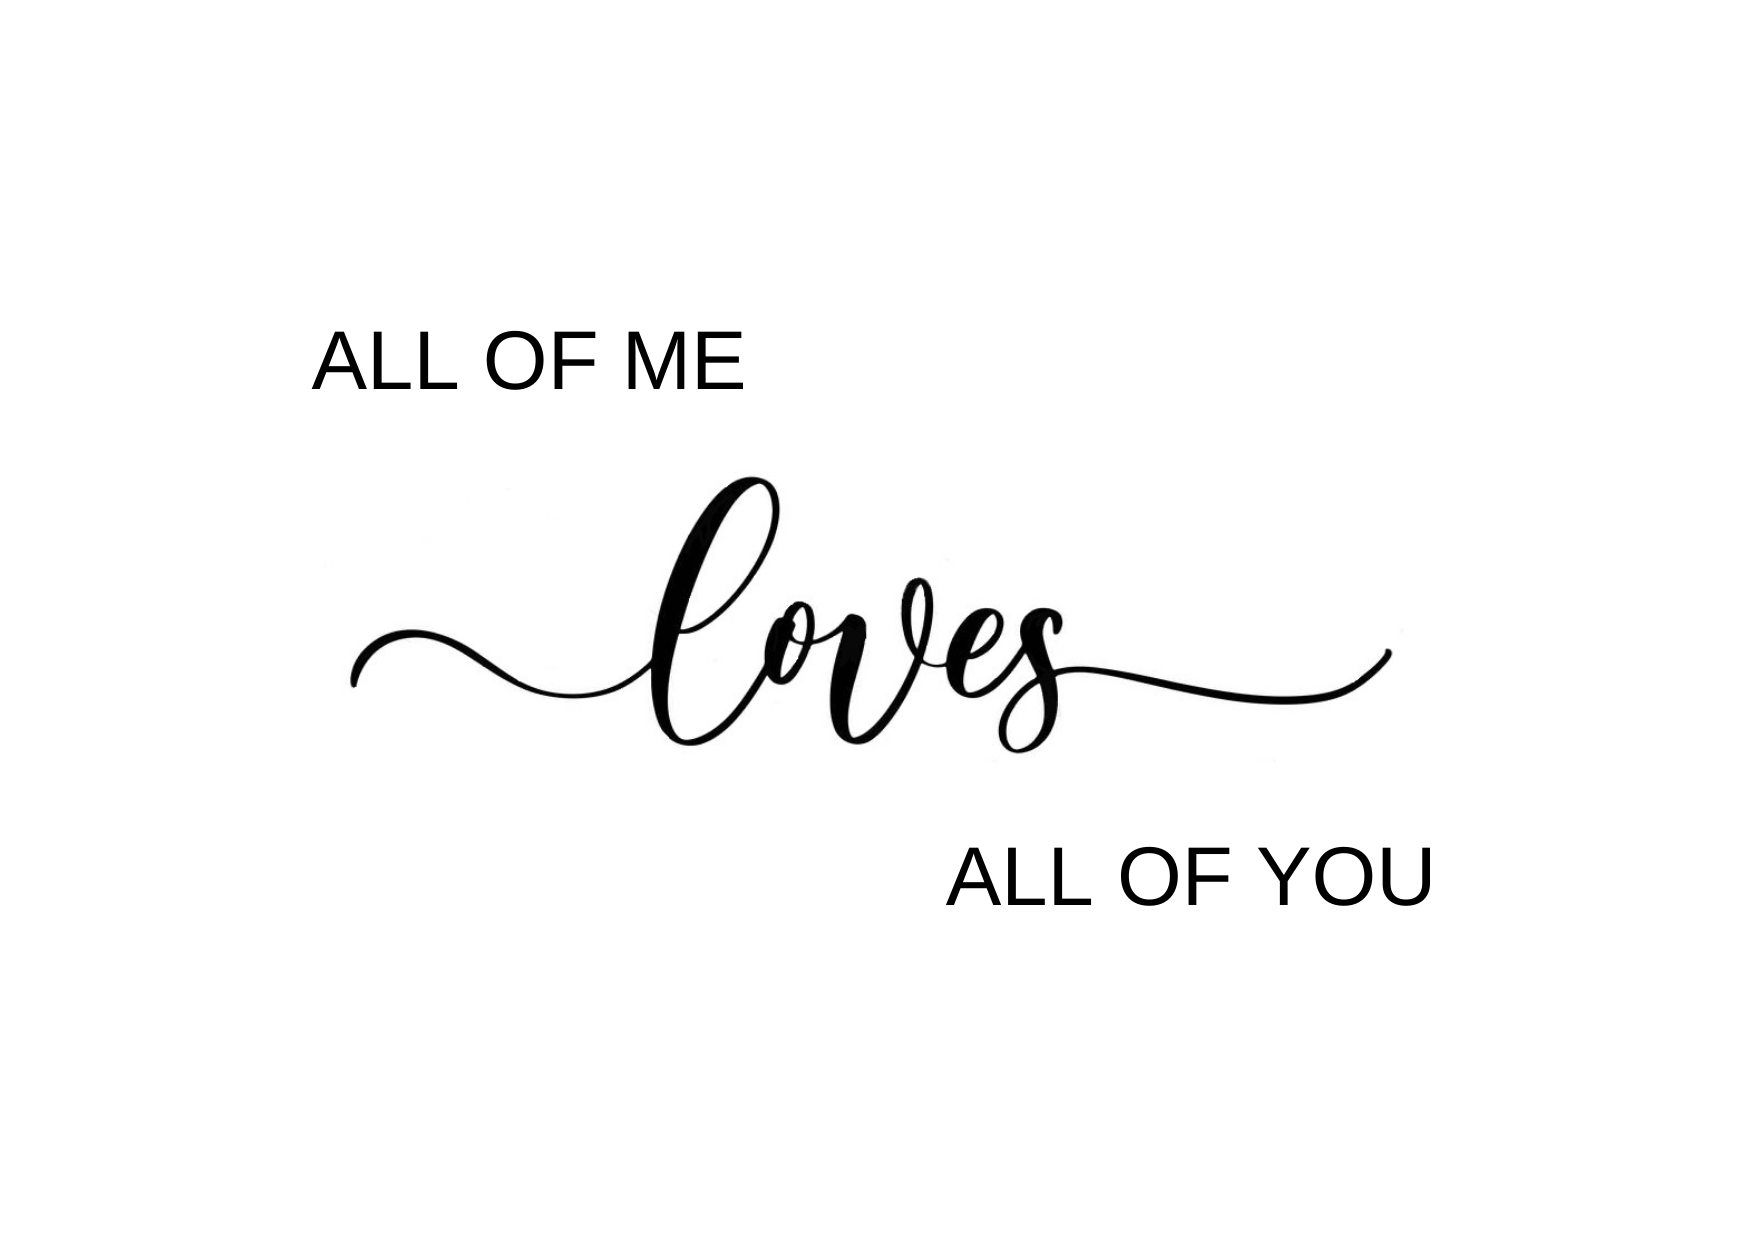 White seed paper greeting card says "All of me loves all of you"